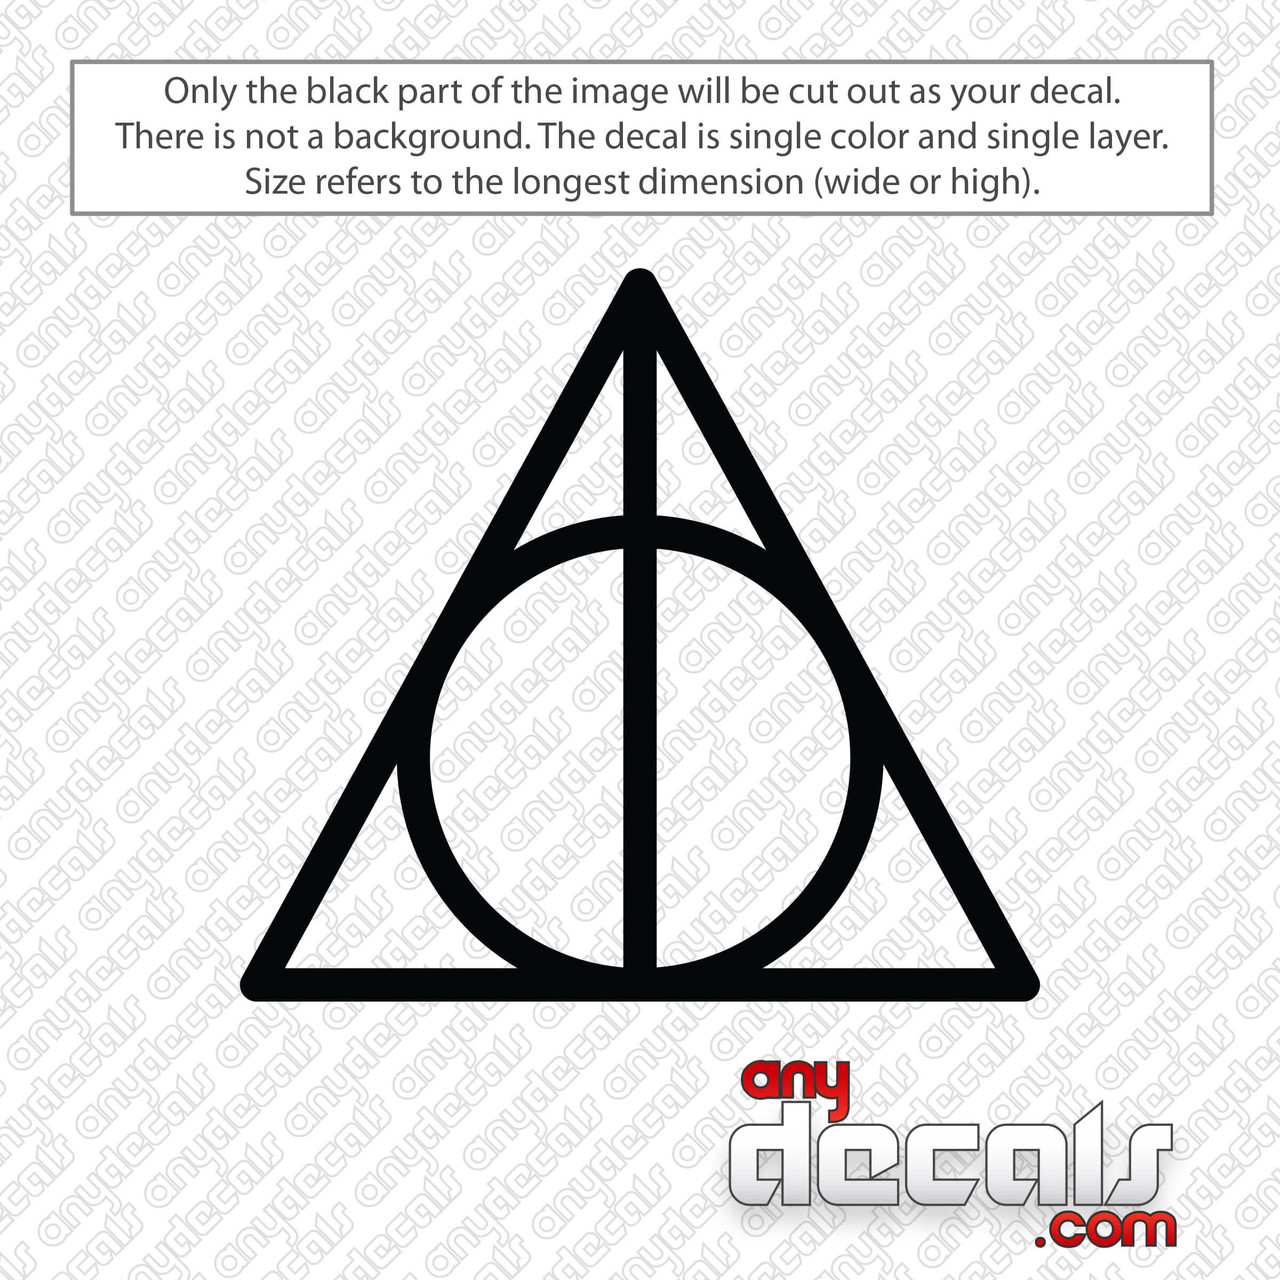 https://cdn11.bigcommerce.com/s-df97c/images/stencil/1280x1280/products/1255/2272/harry-potter-deathly-hallows-decal-sticker__09411.1602526919.jpg?c=2?imbypass=on